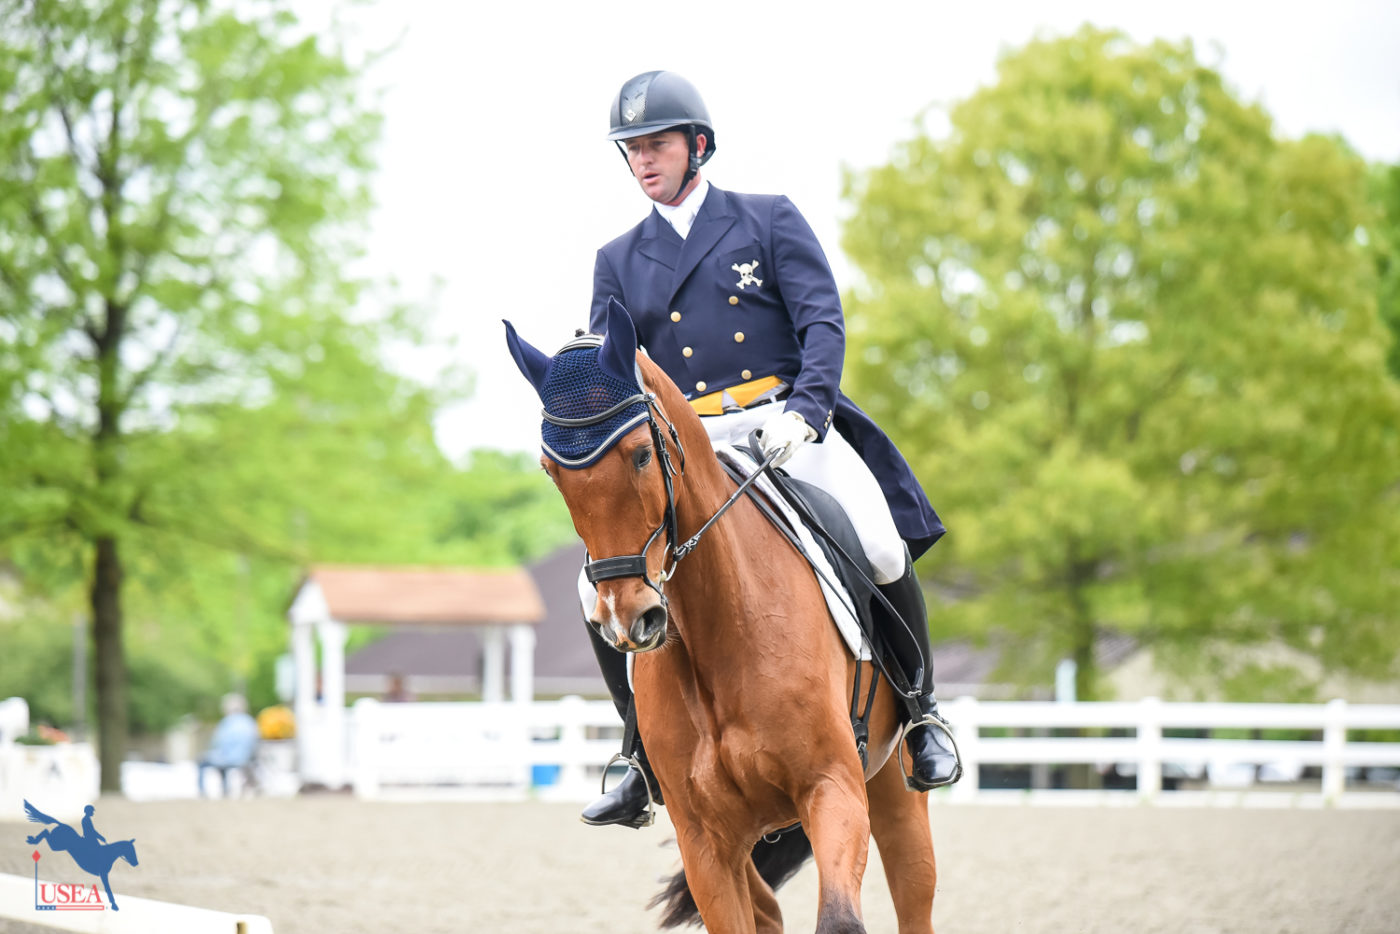 Will Faudree rocking the skull and crossbones in the dressage ring. USEA/Jessica Duffy Photo.